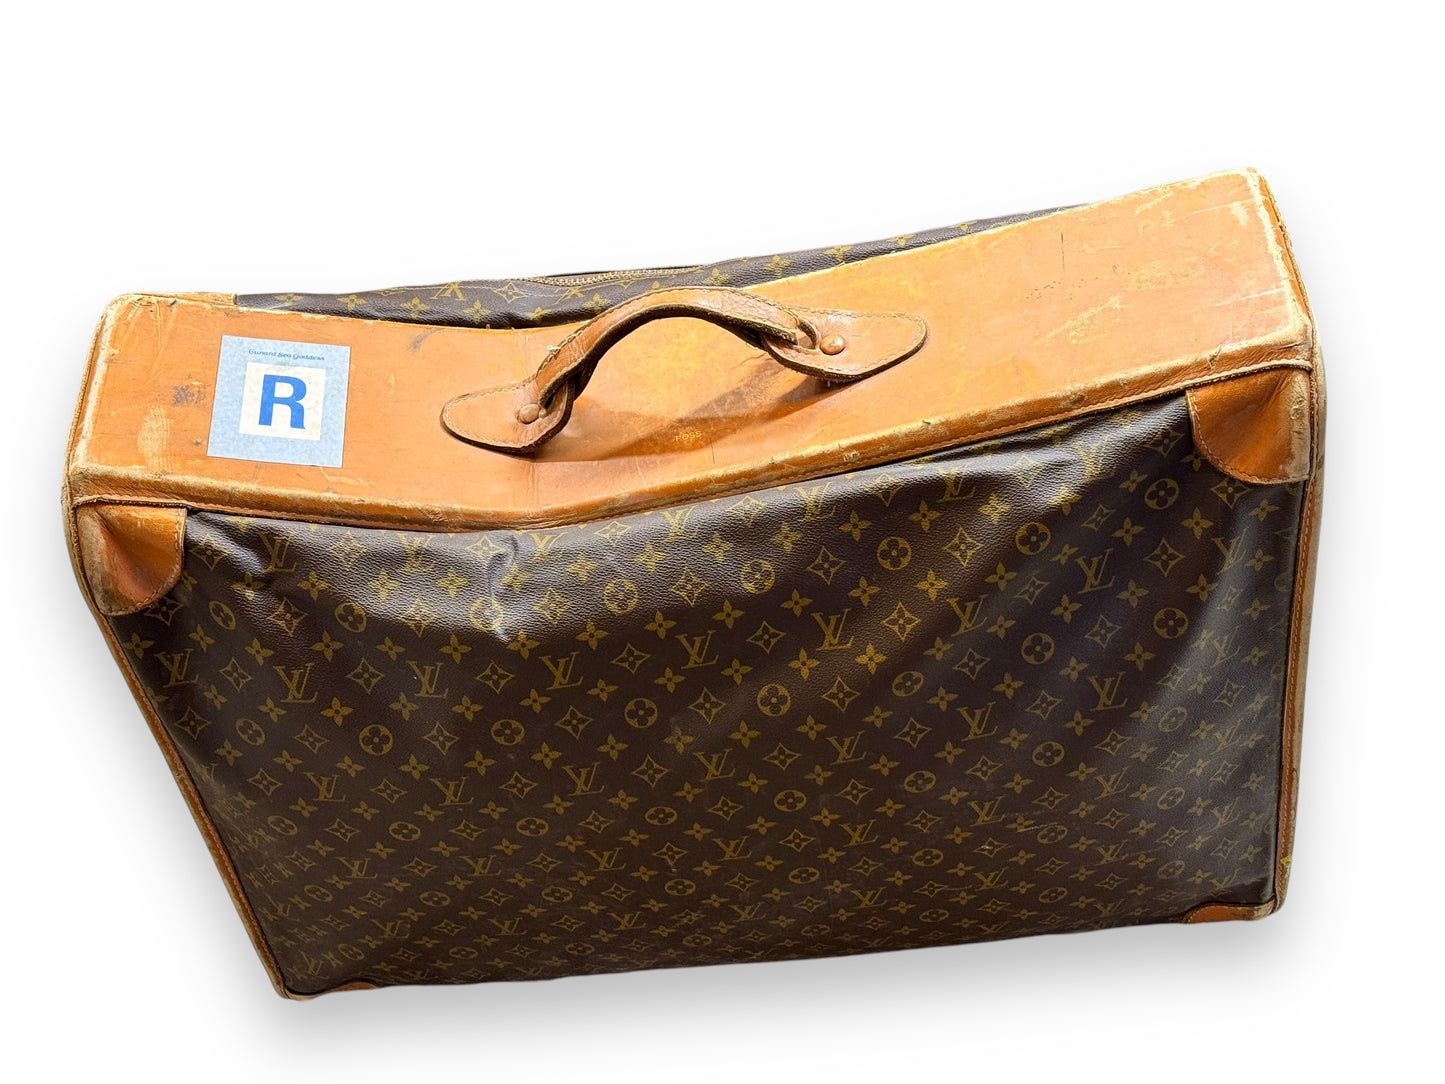 Vintage Louis Vuitton Luggage (Decor Use Only)